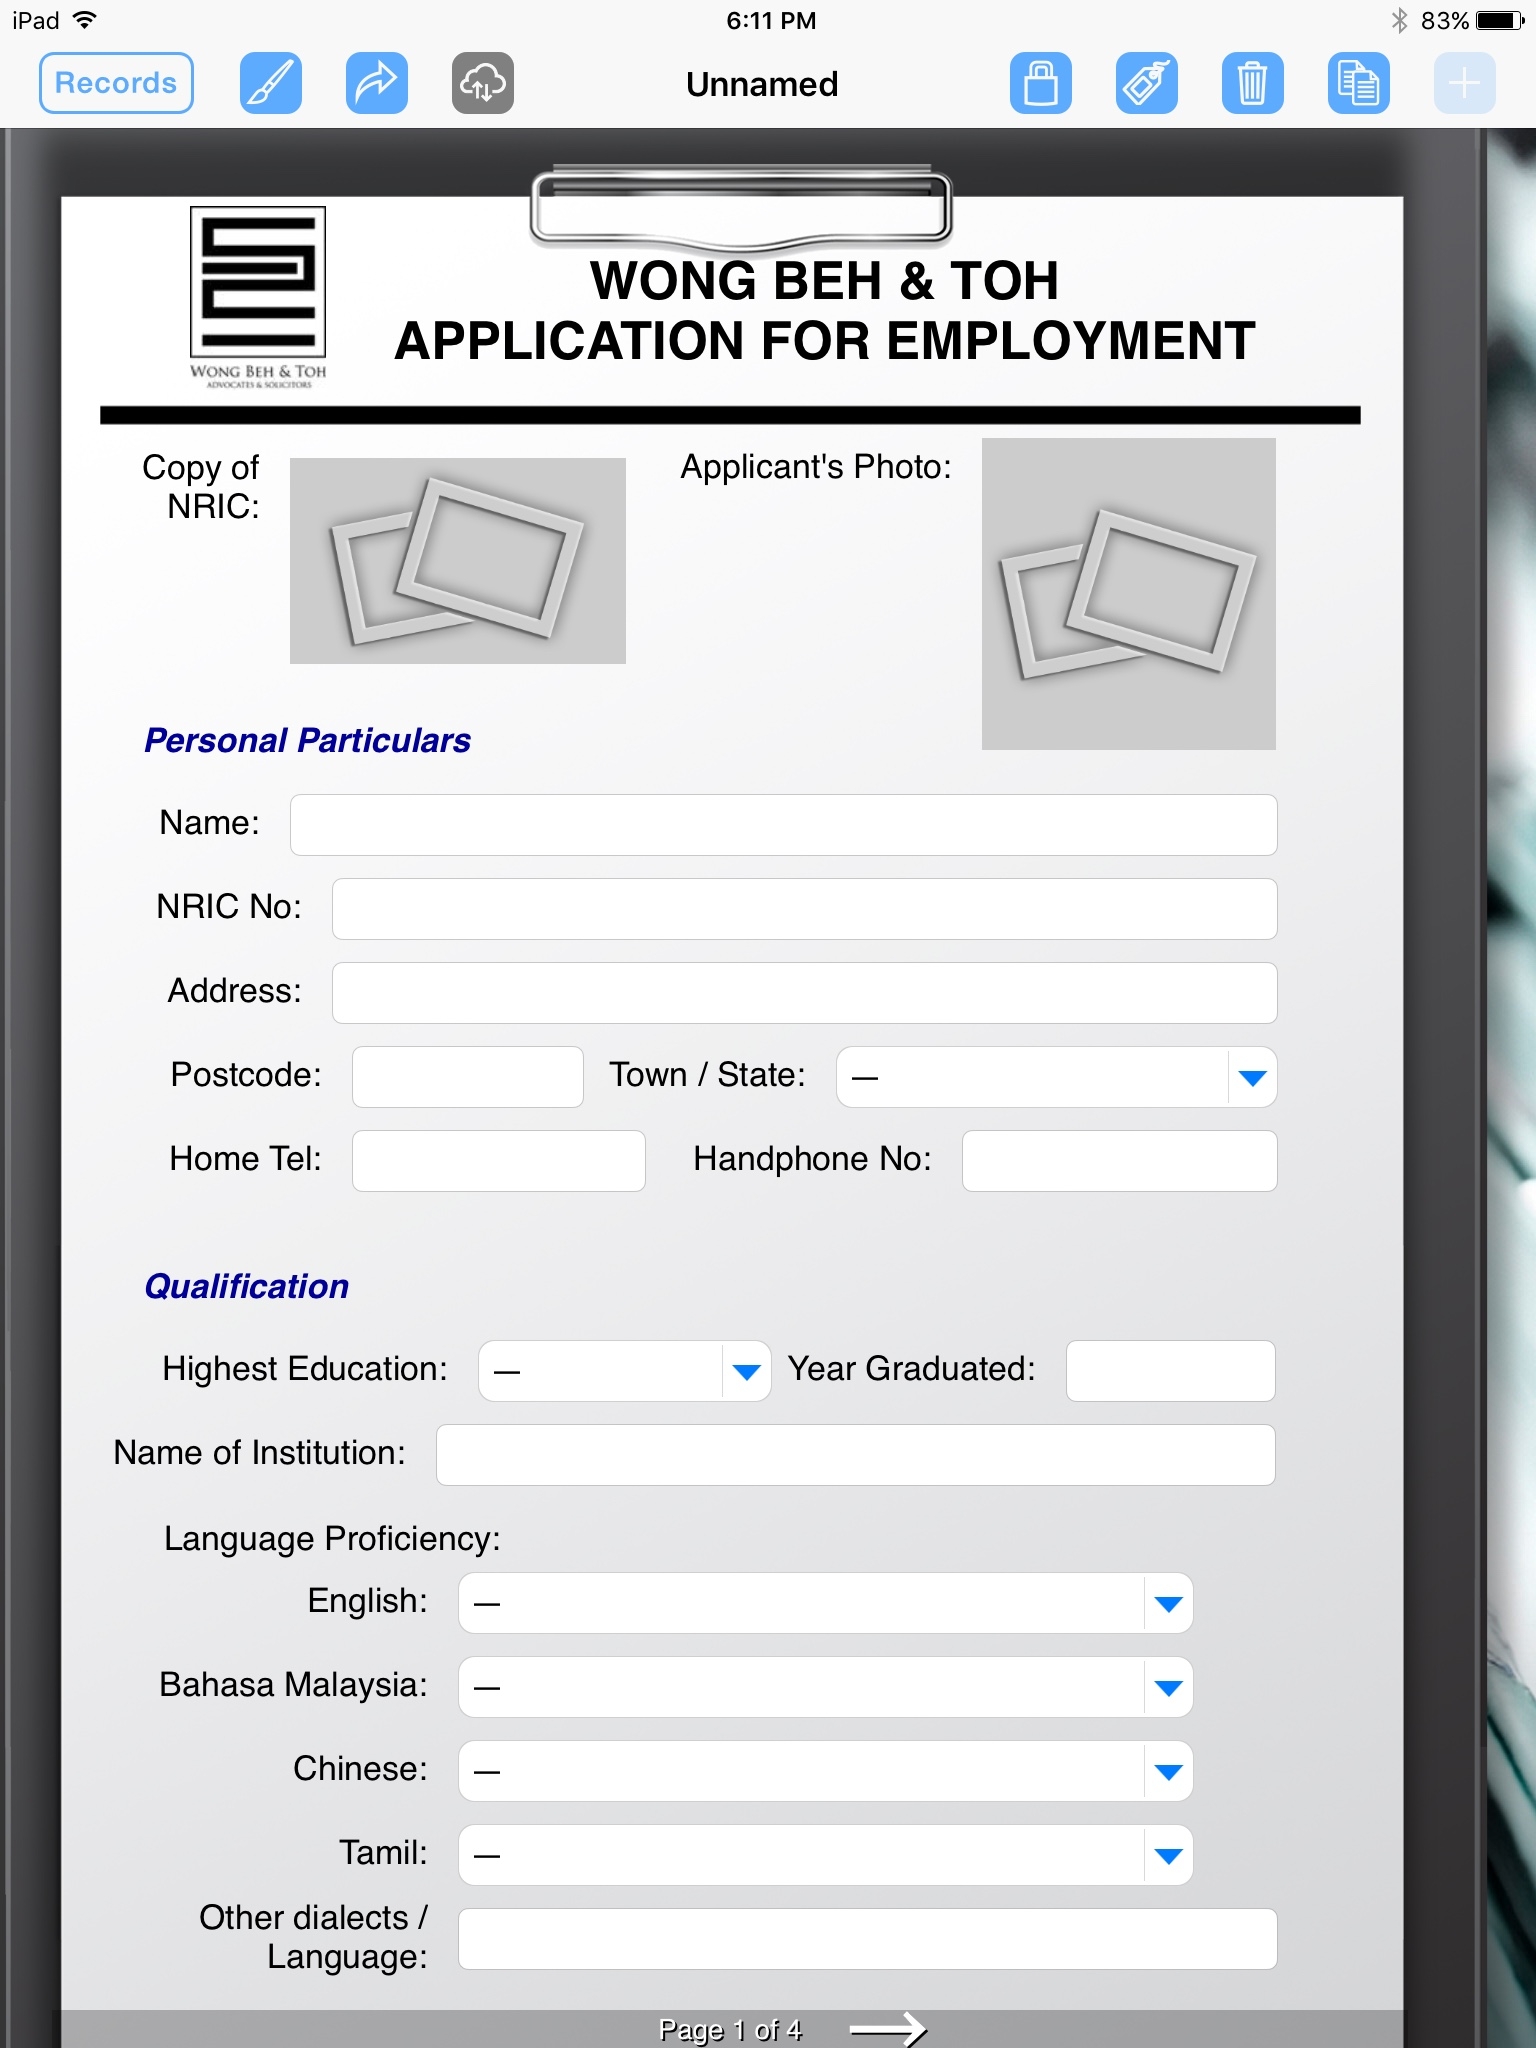 Can Ipads Be USed For Fillable Forms?